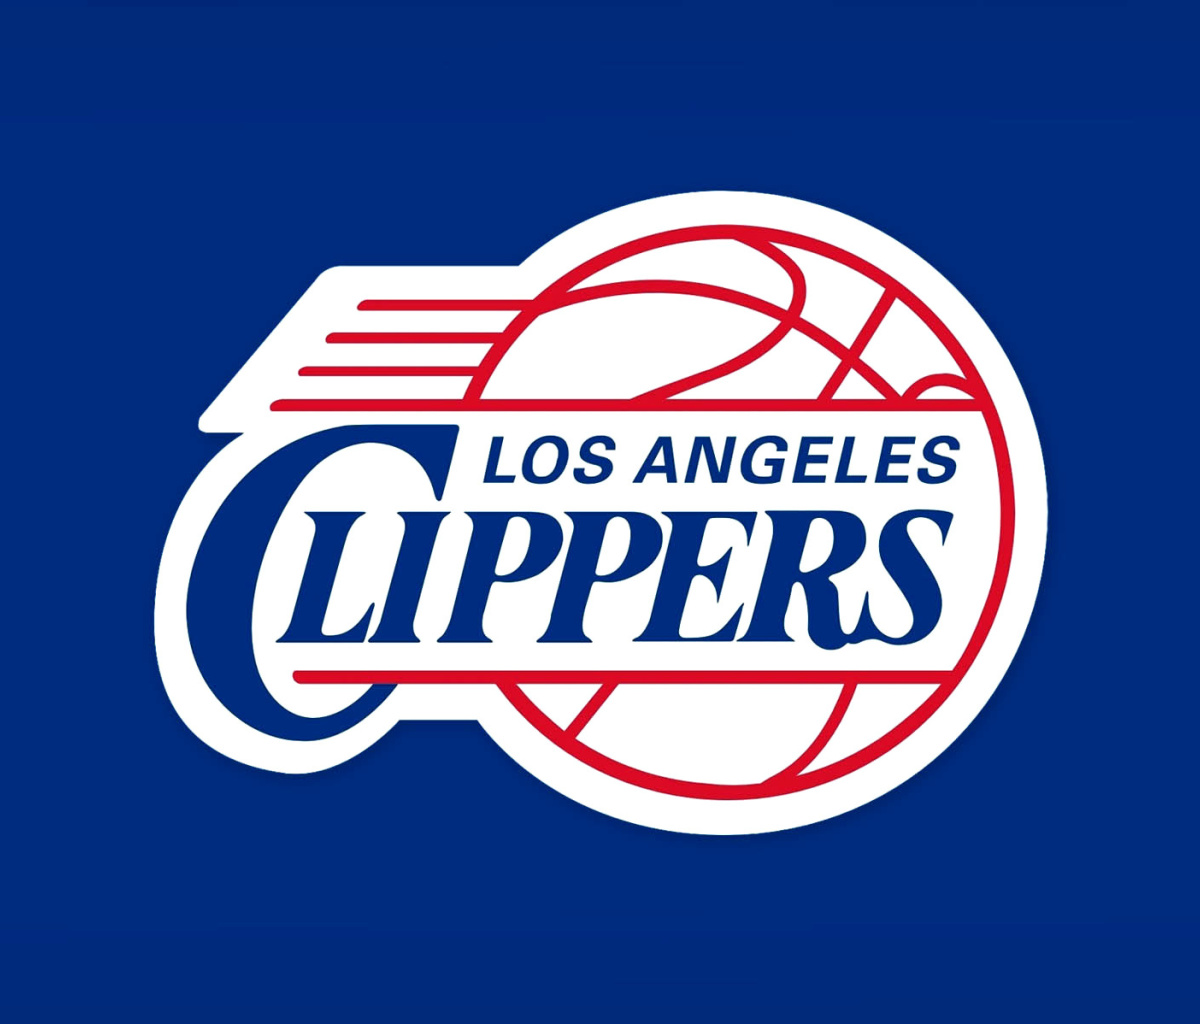 Los Angeles Clippers wallpaper 1200x1024